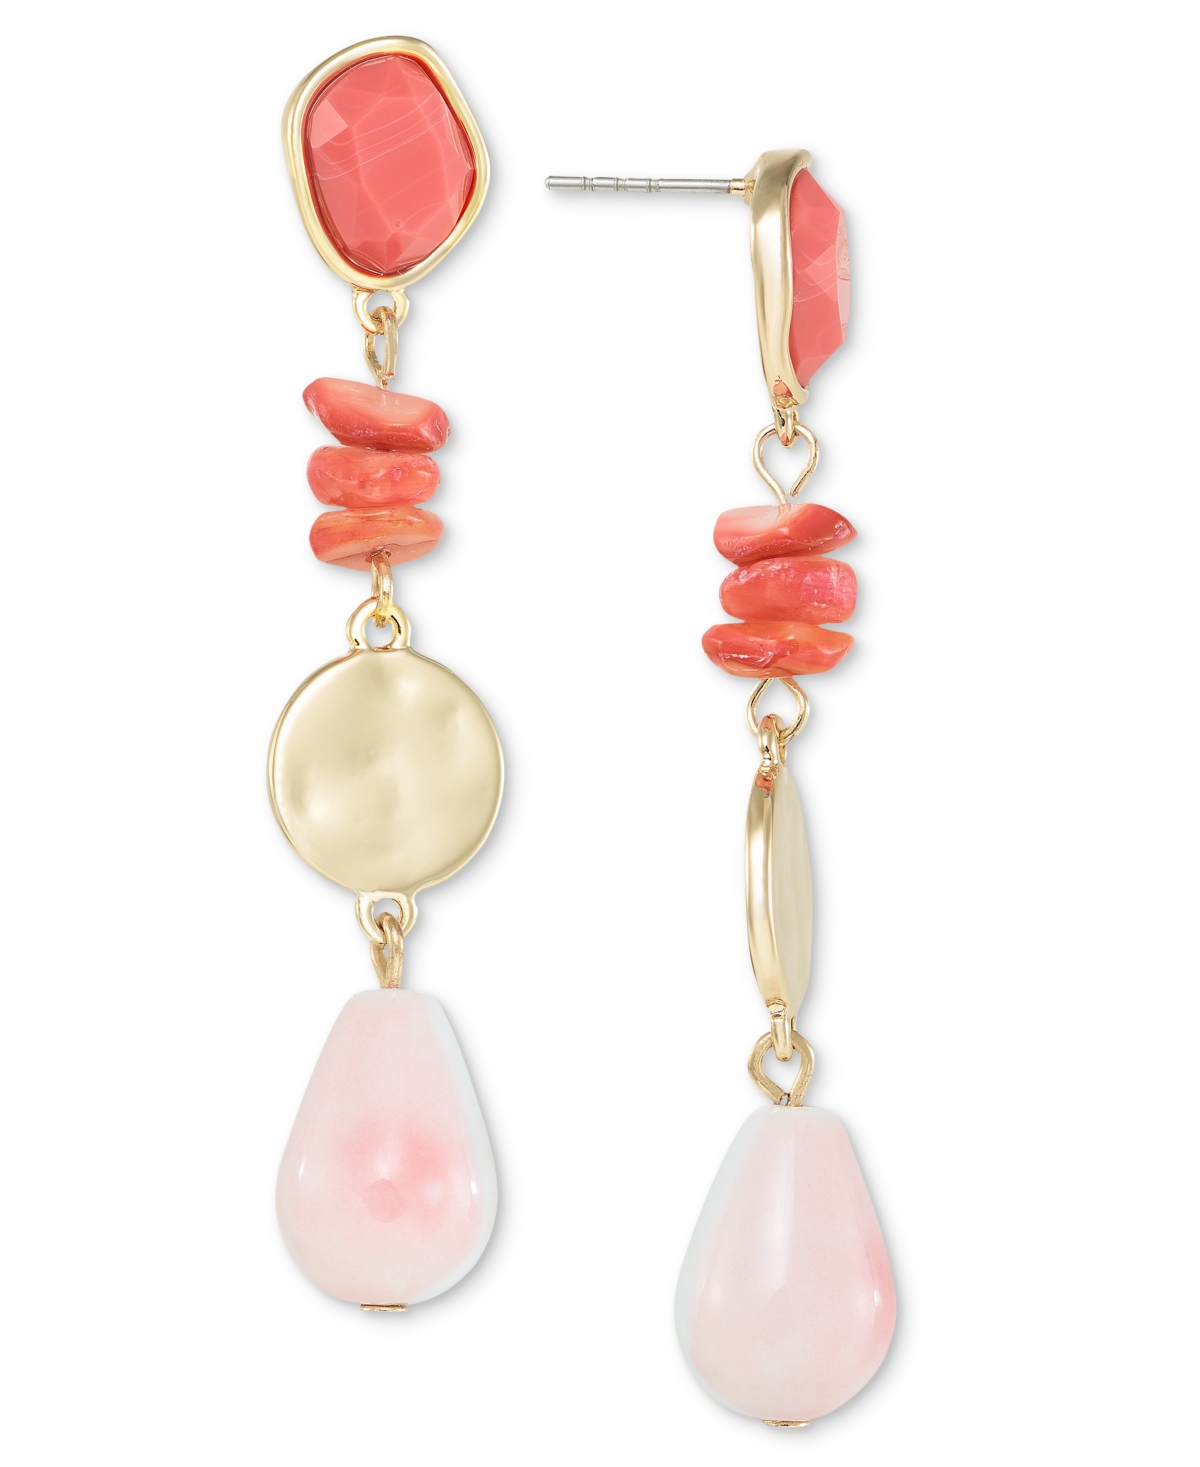 Stone & Bead Linear Drop Earrings, Created for Macy's - Coral